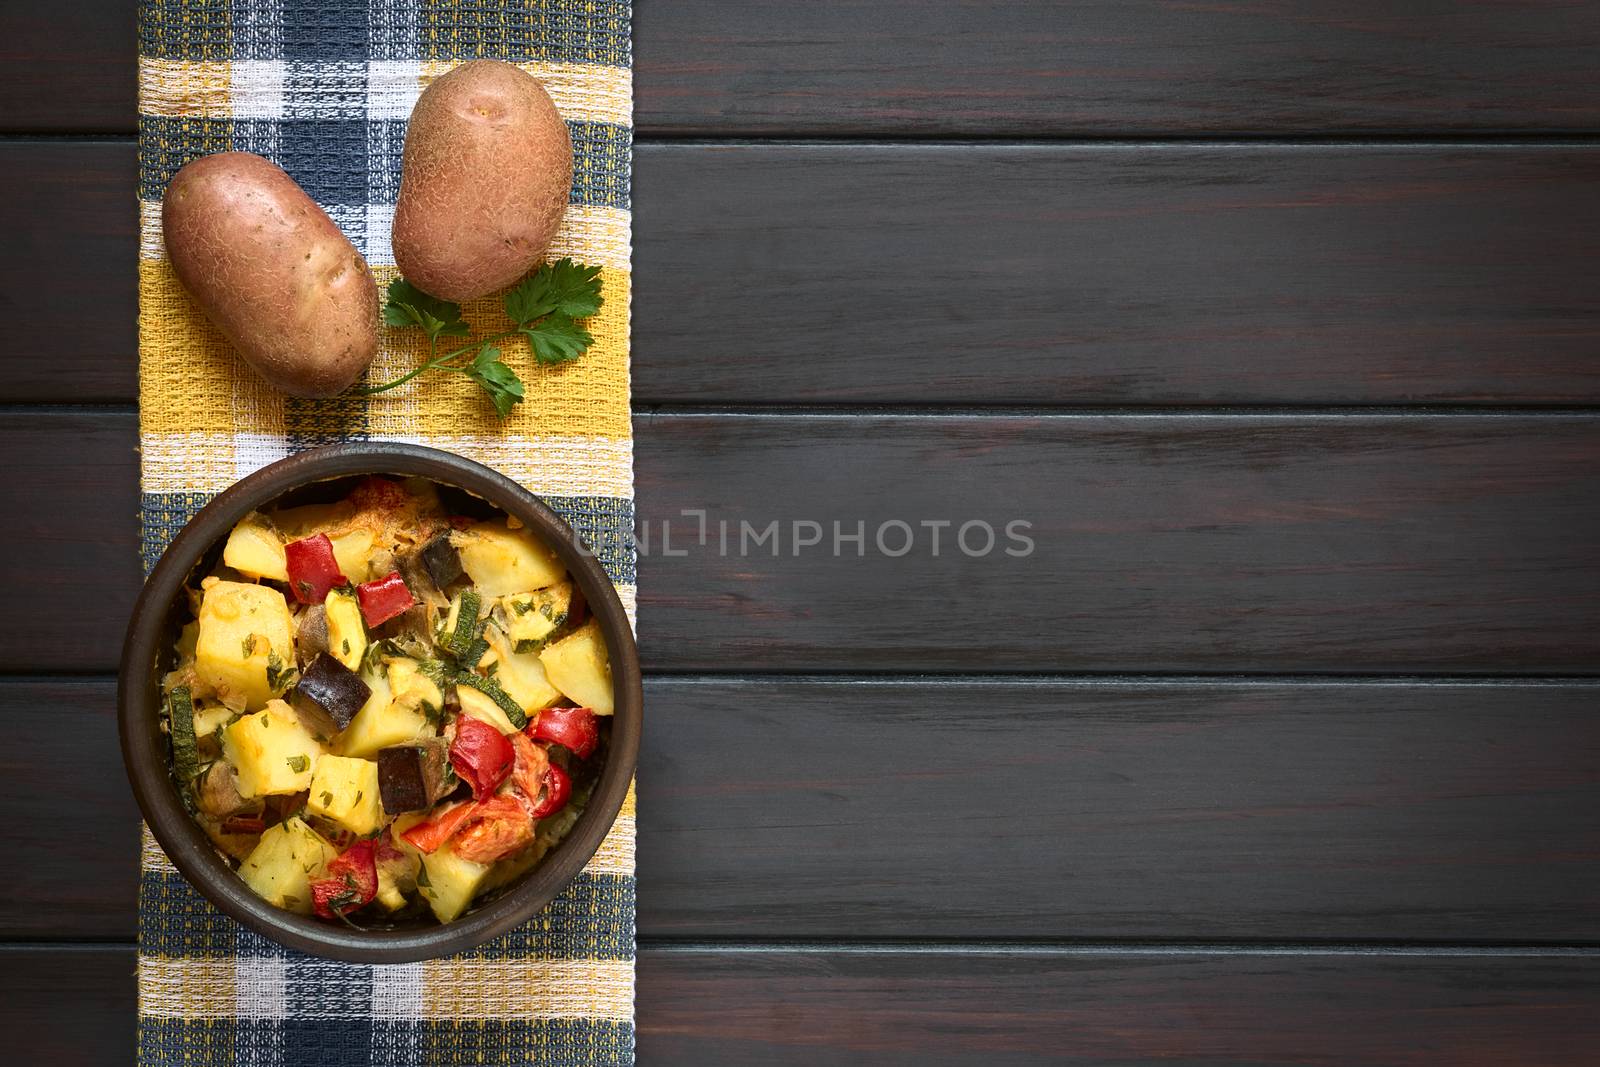 Baked potato, eggplant, zucchini and tomato casserole in rustic bowl, with raw potatoes and parsley leaf on kitchen towel, photographed overhead on dark wood with natural light